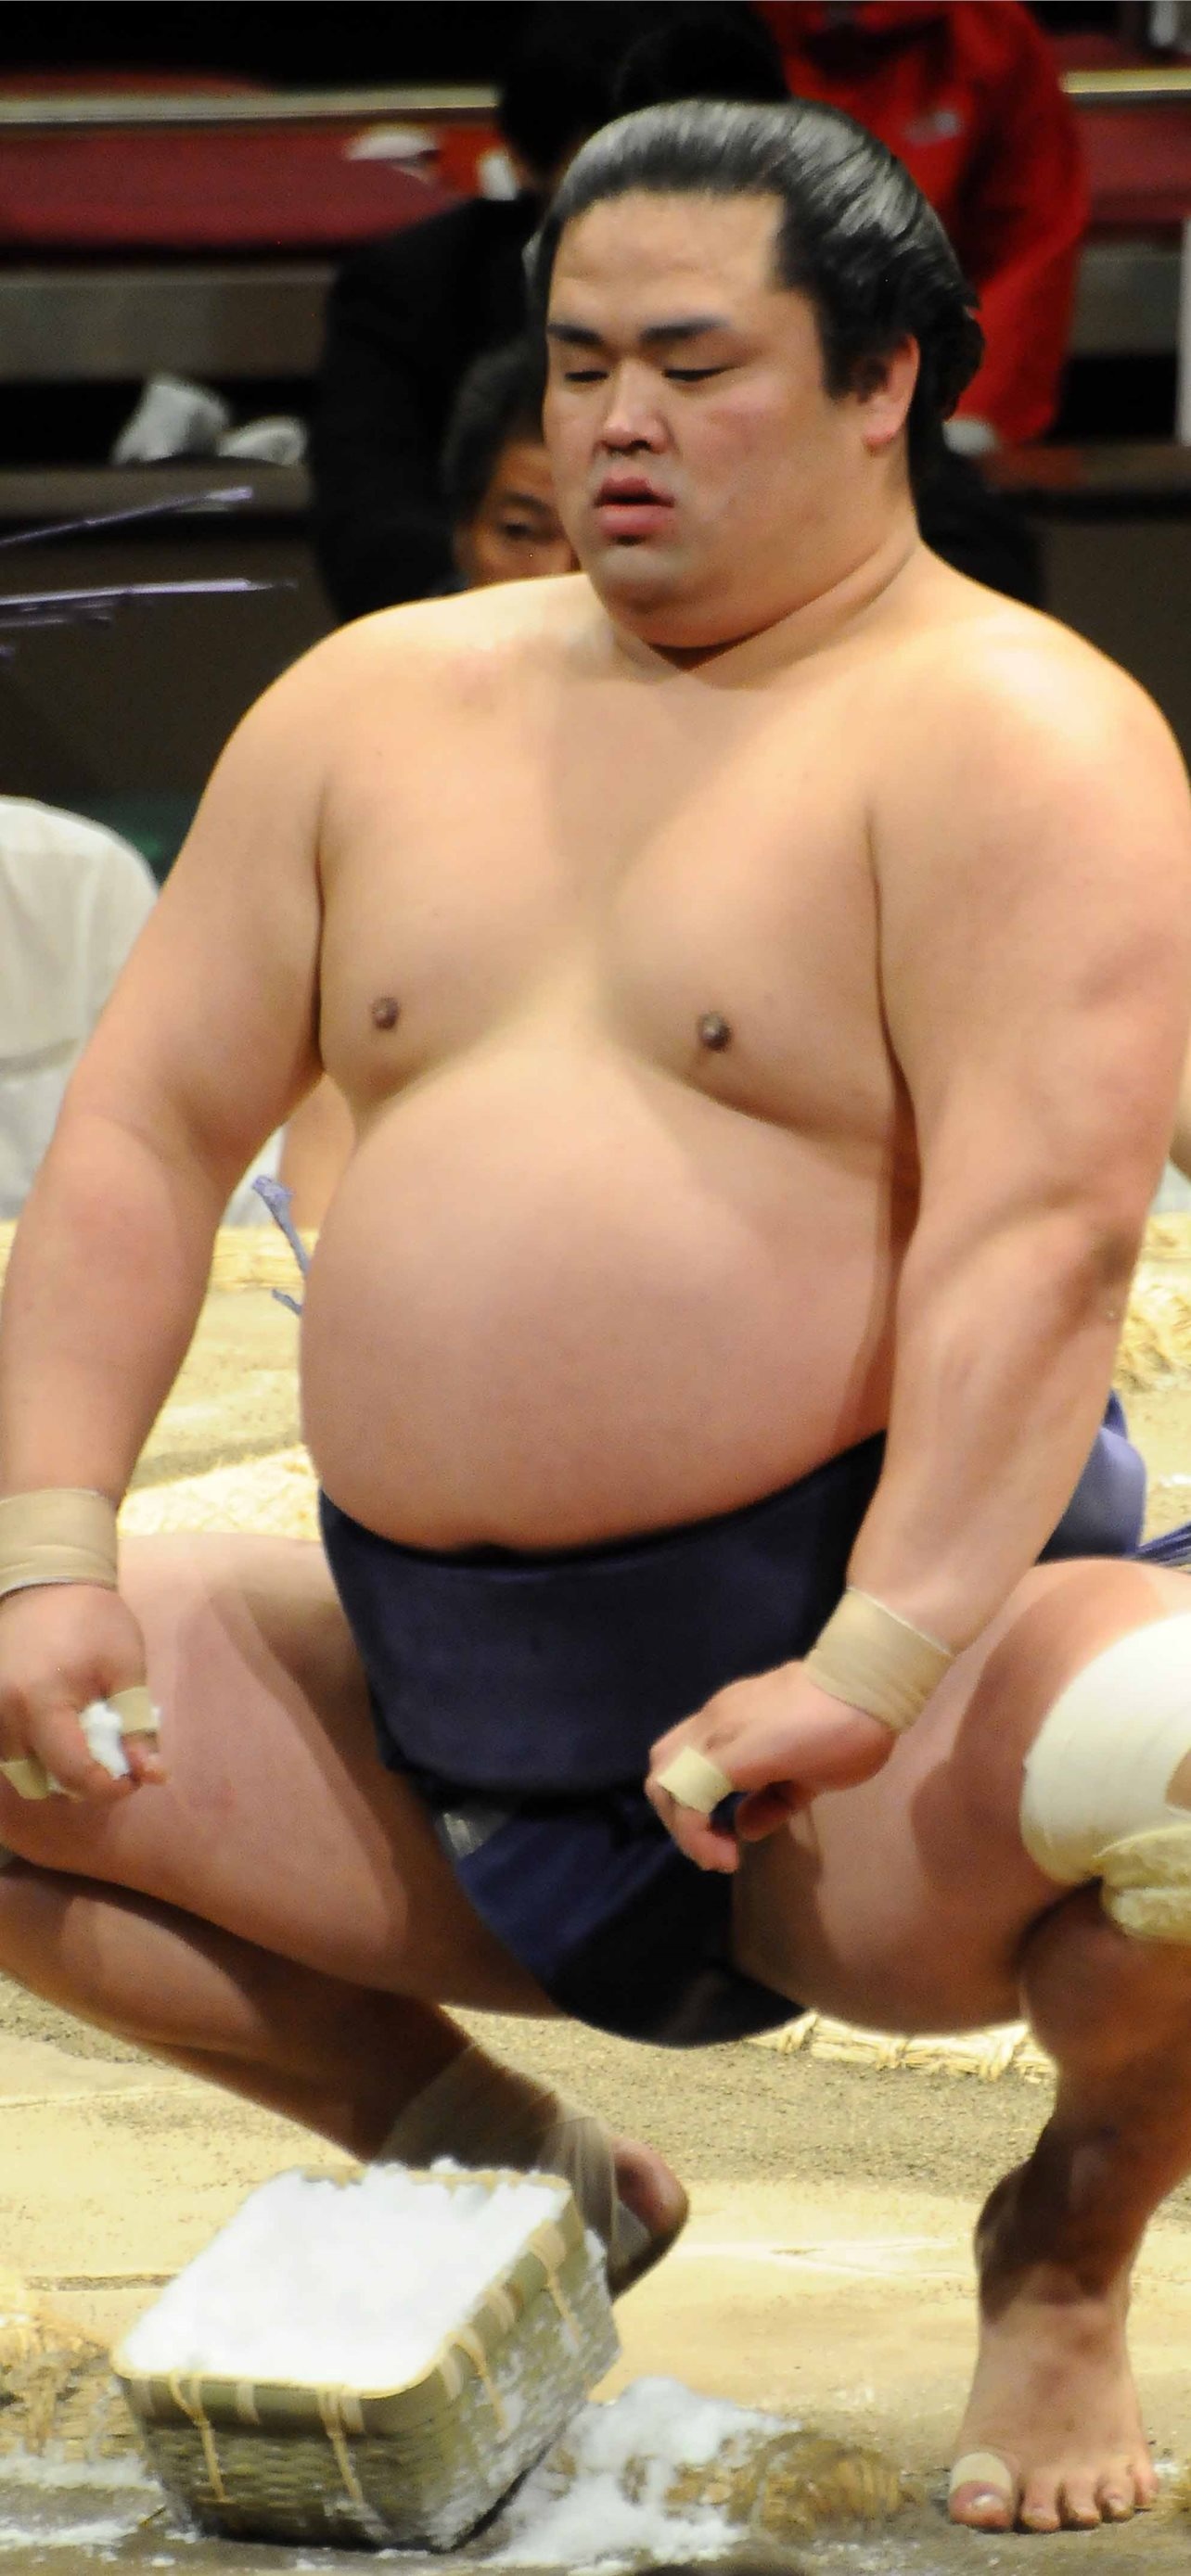 Sumo: Japanese wrestler, The Japanese form of competitive full-contact wrestling. 1290x2780 HD Wallpaper.